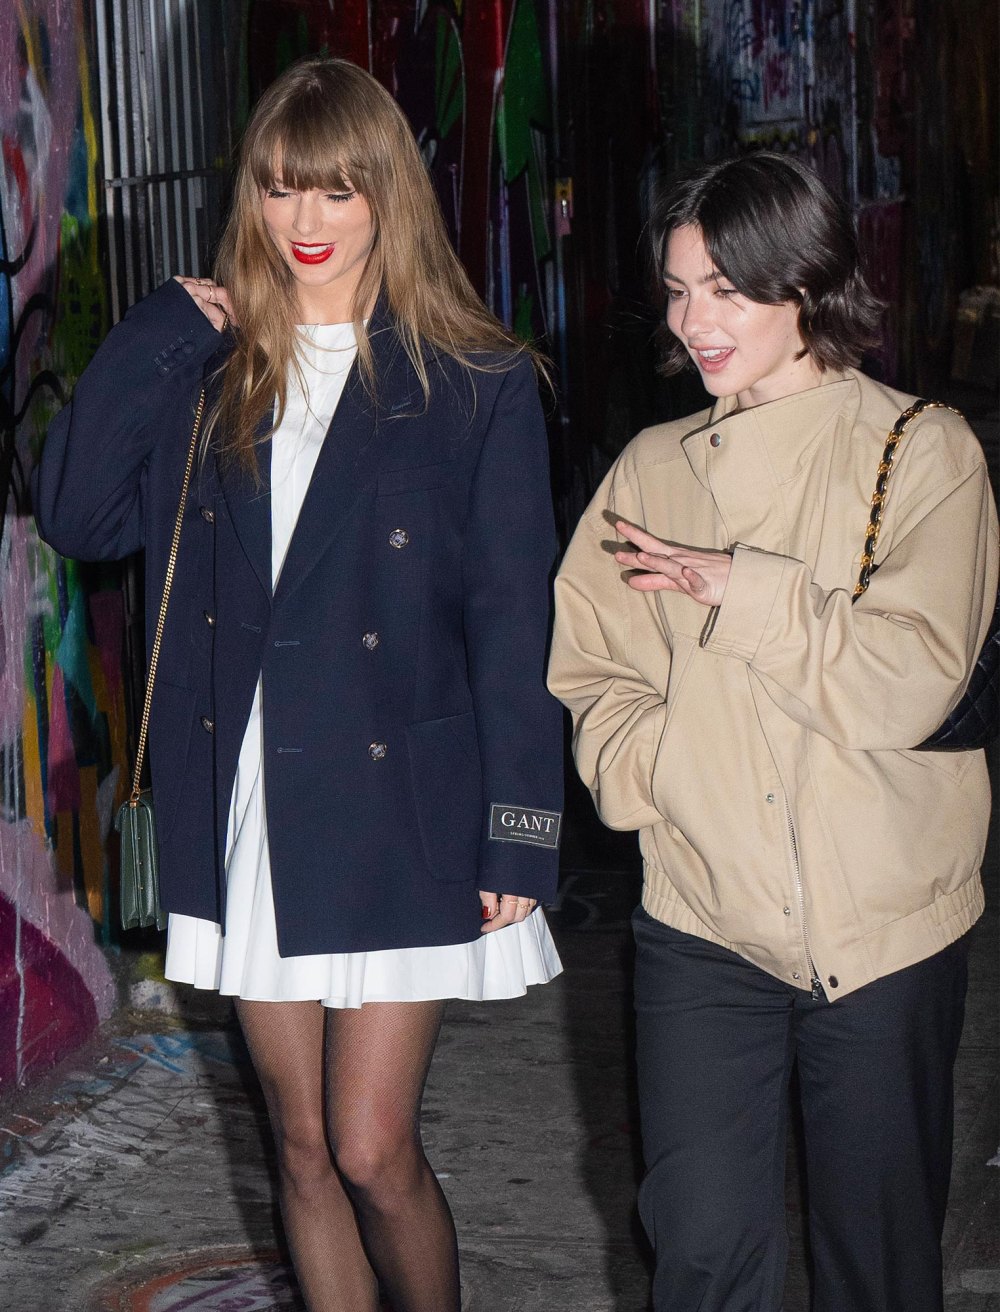 Gracie Abrams Reveals What Taylor Swift Song She Was Listening to In Viral Crying Photos 576: 